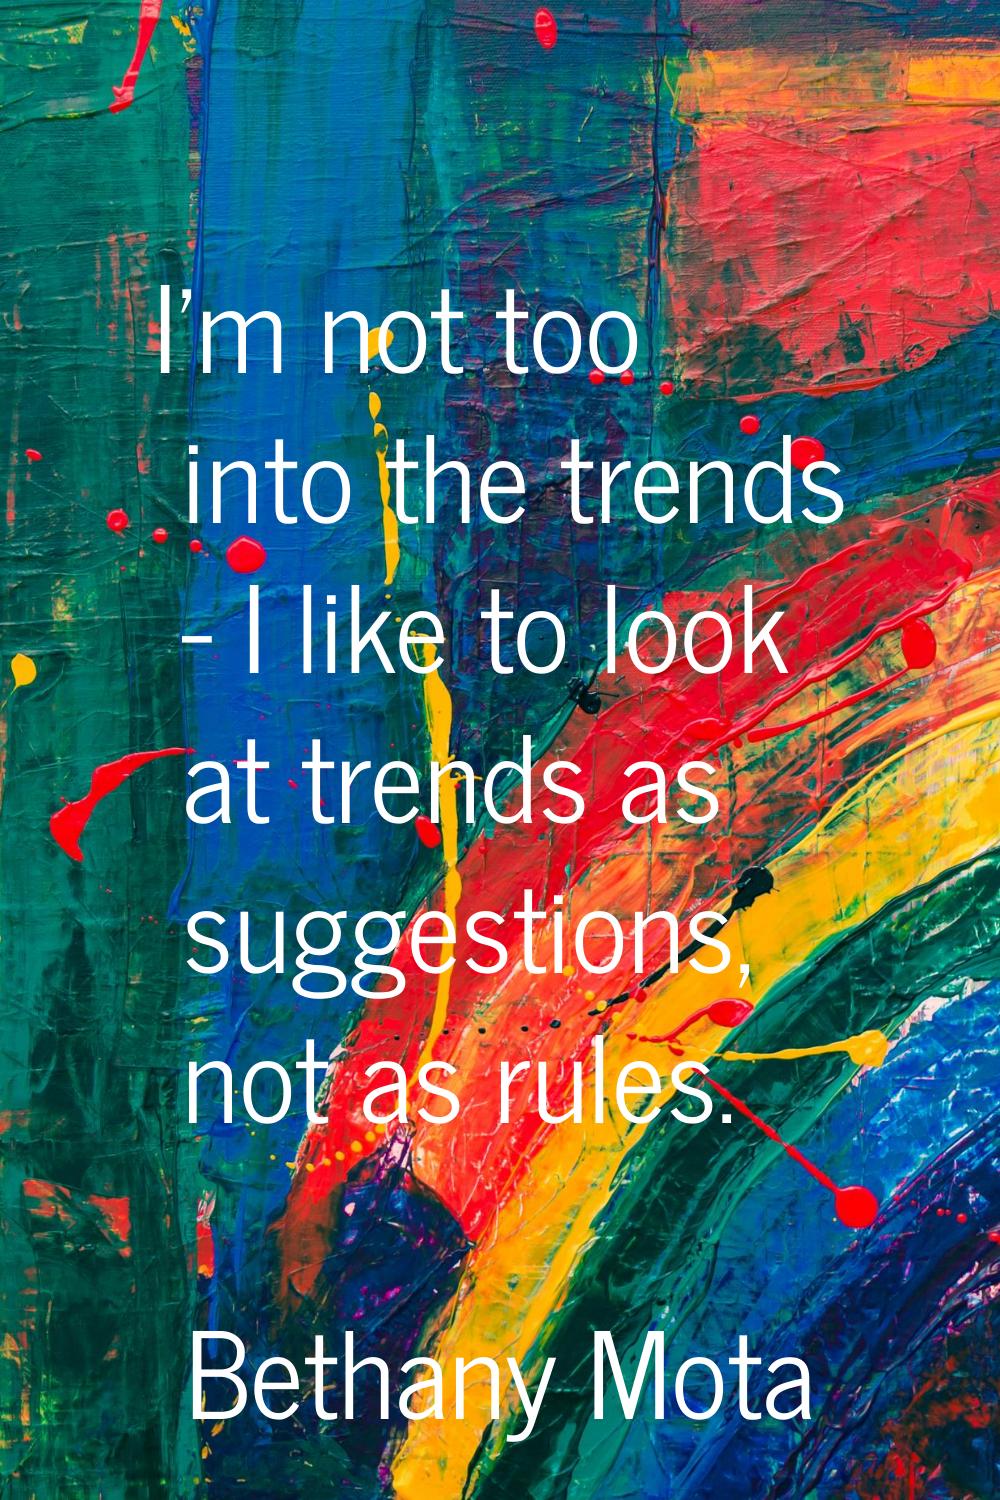 I'm not too into the trends - I like to look at trends as suggestions, not as rules.